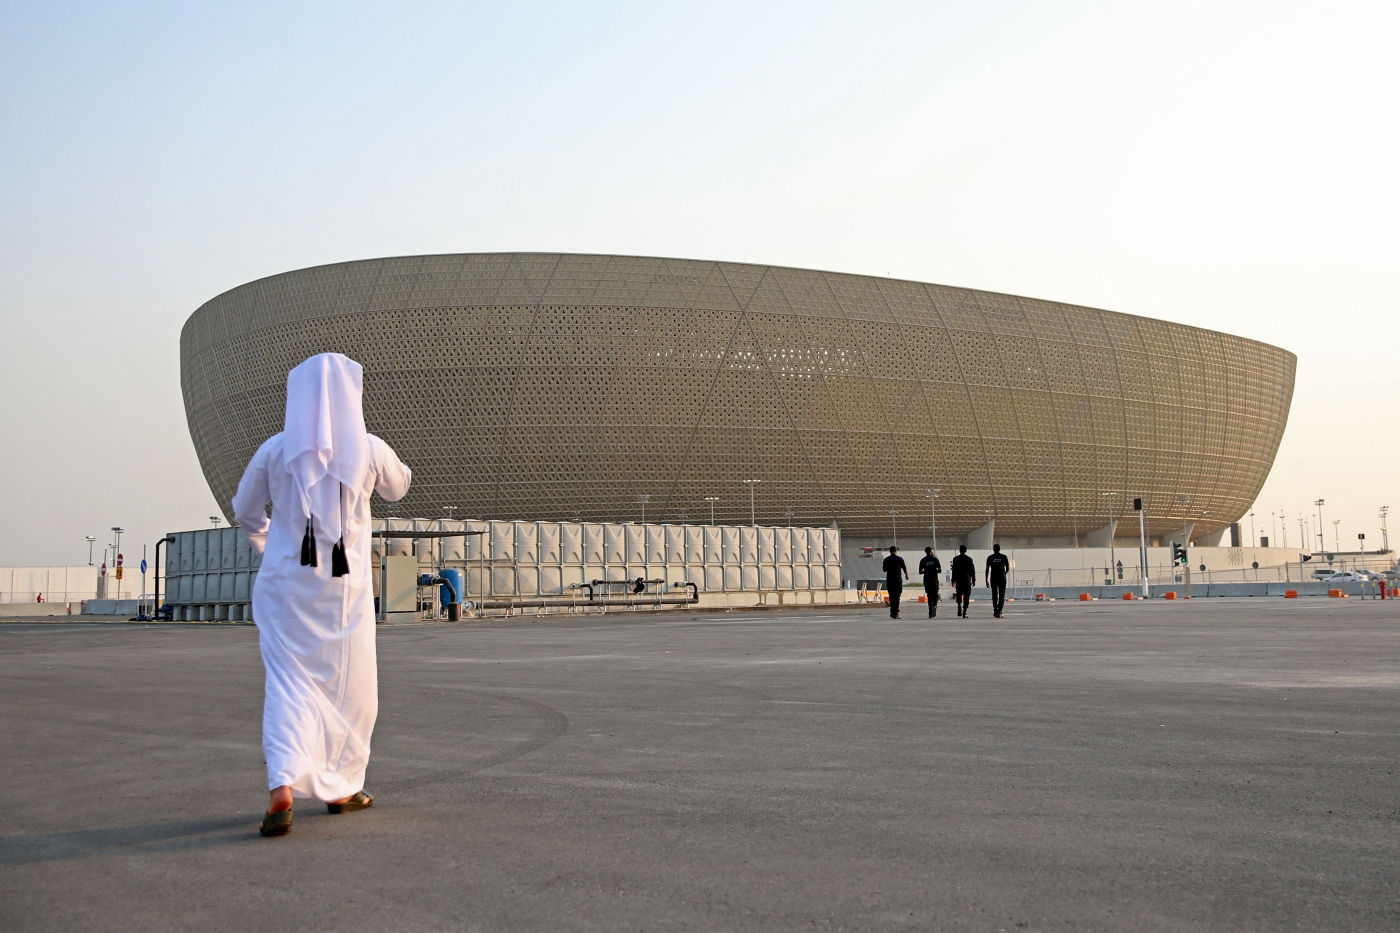 Lusail Stadium will host the FIFA World Cup final in December 2022